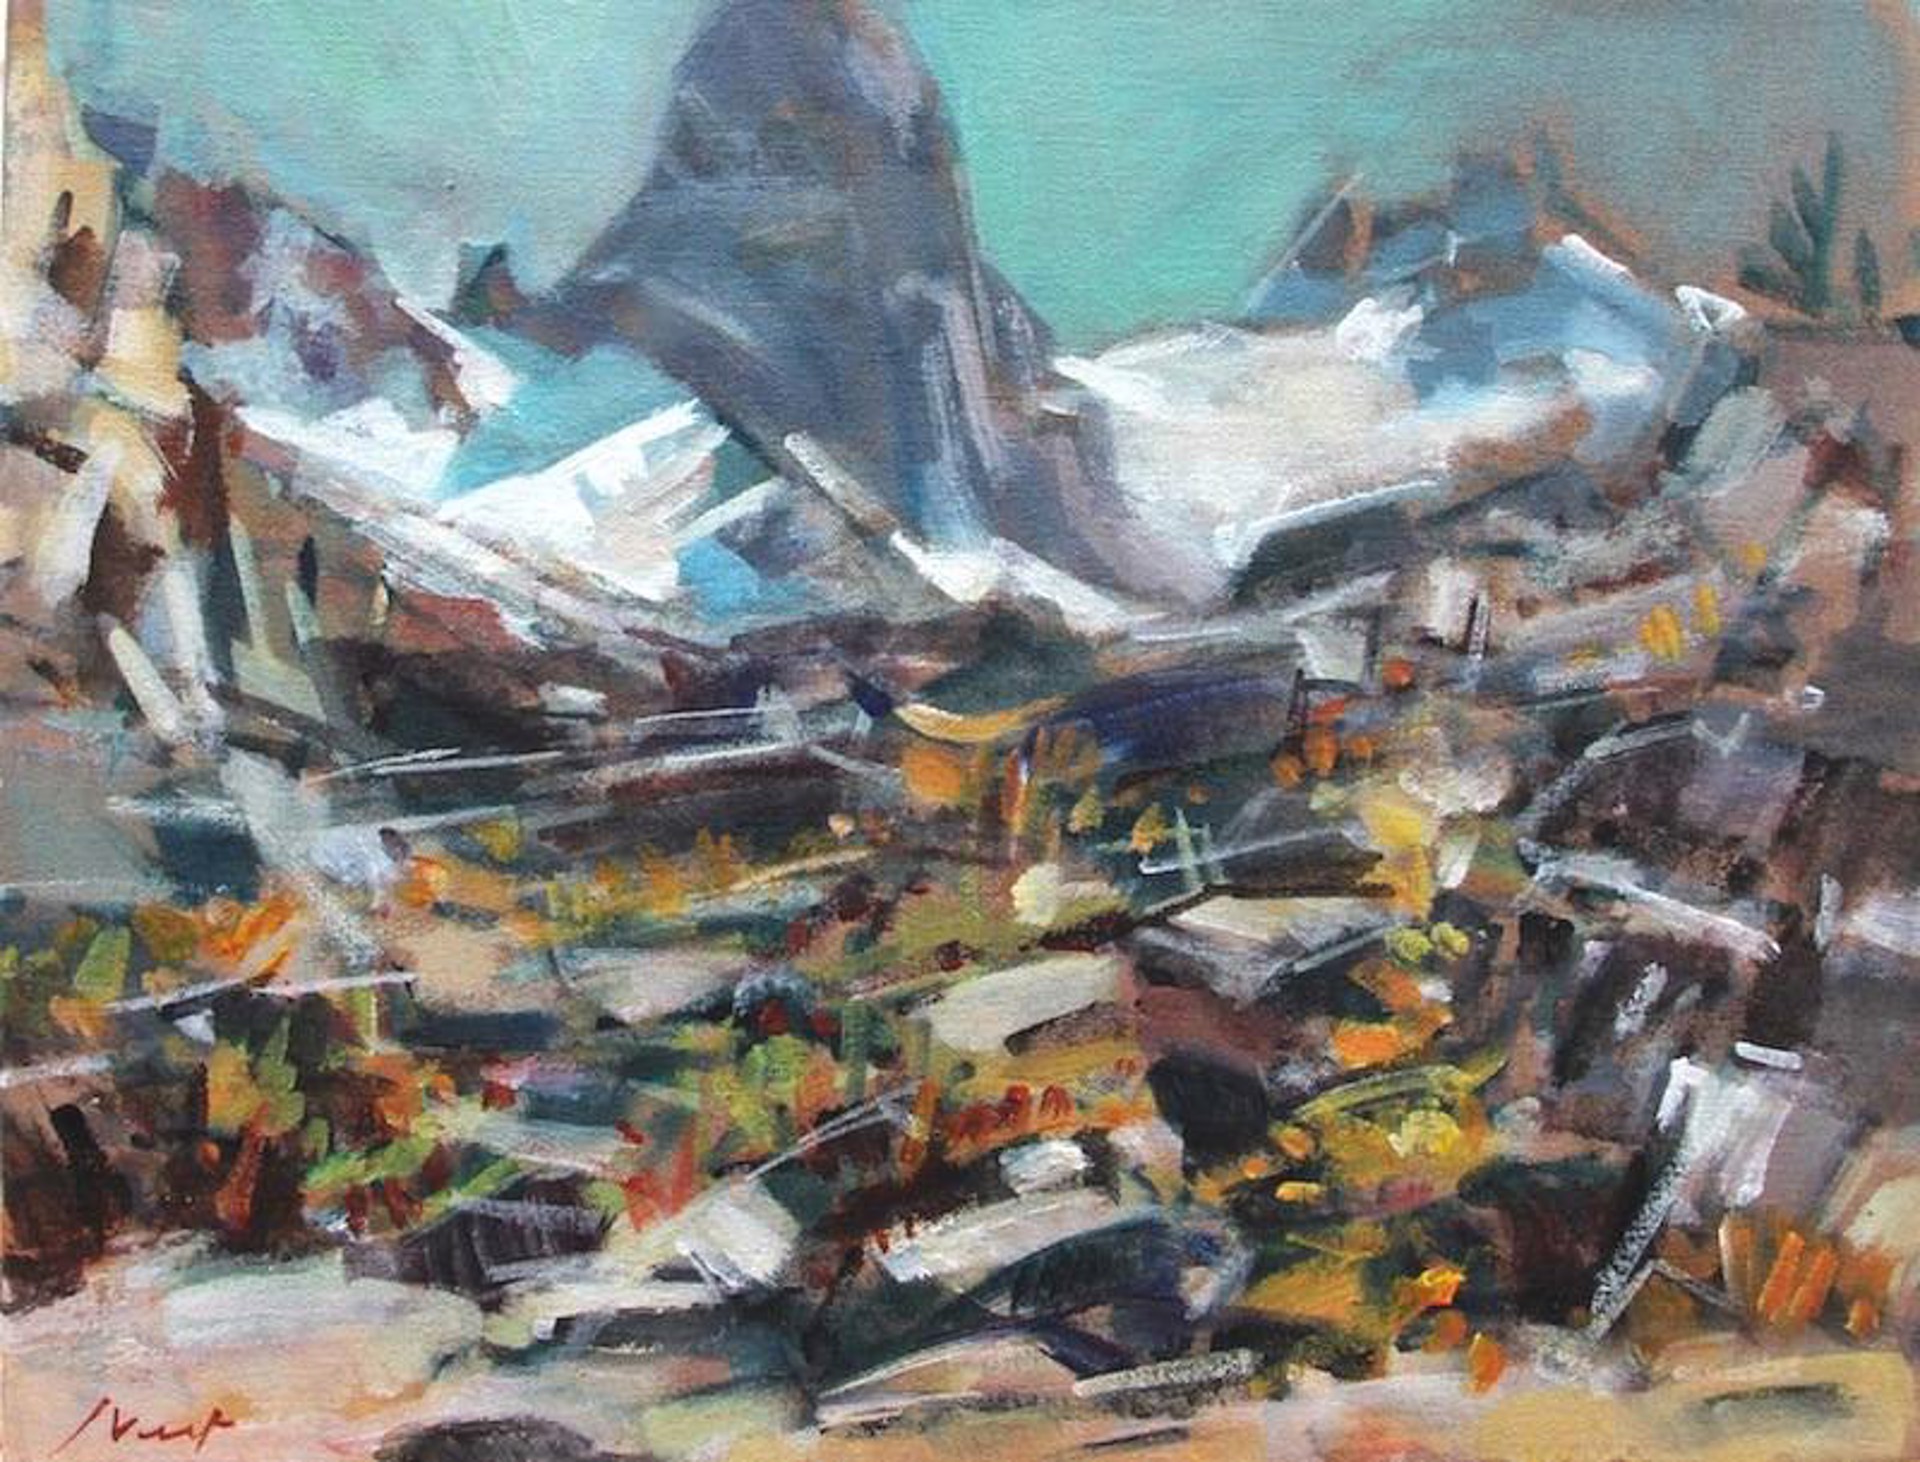 Bugaboo Spire from Tamarack (study) by Jim Vest